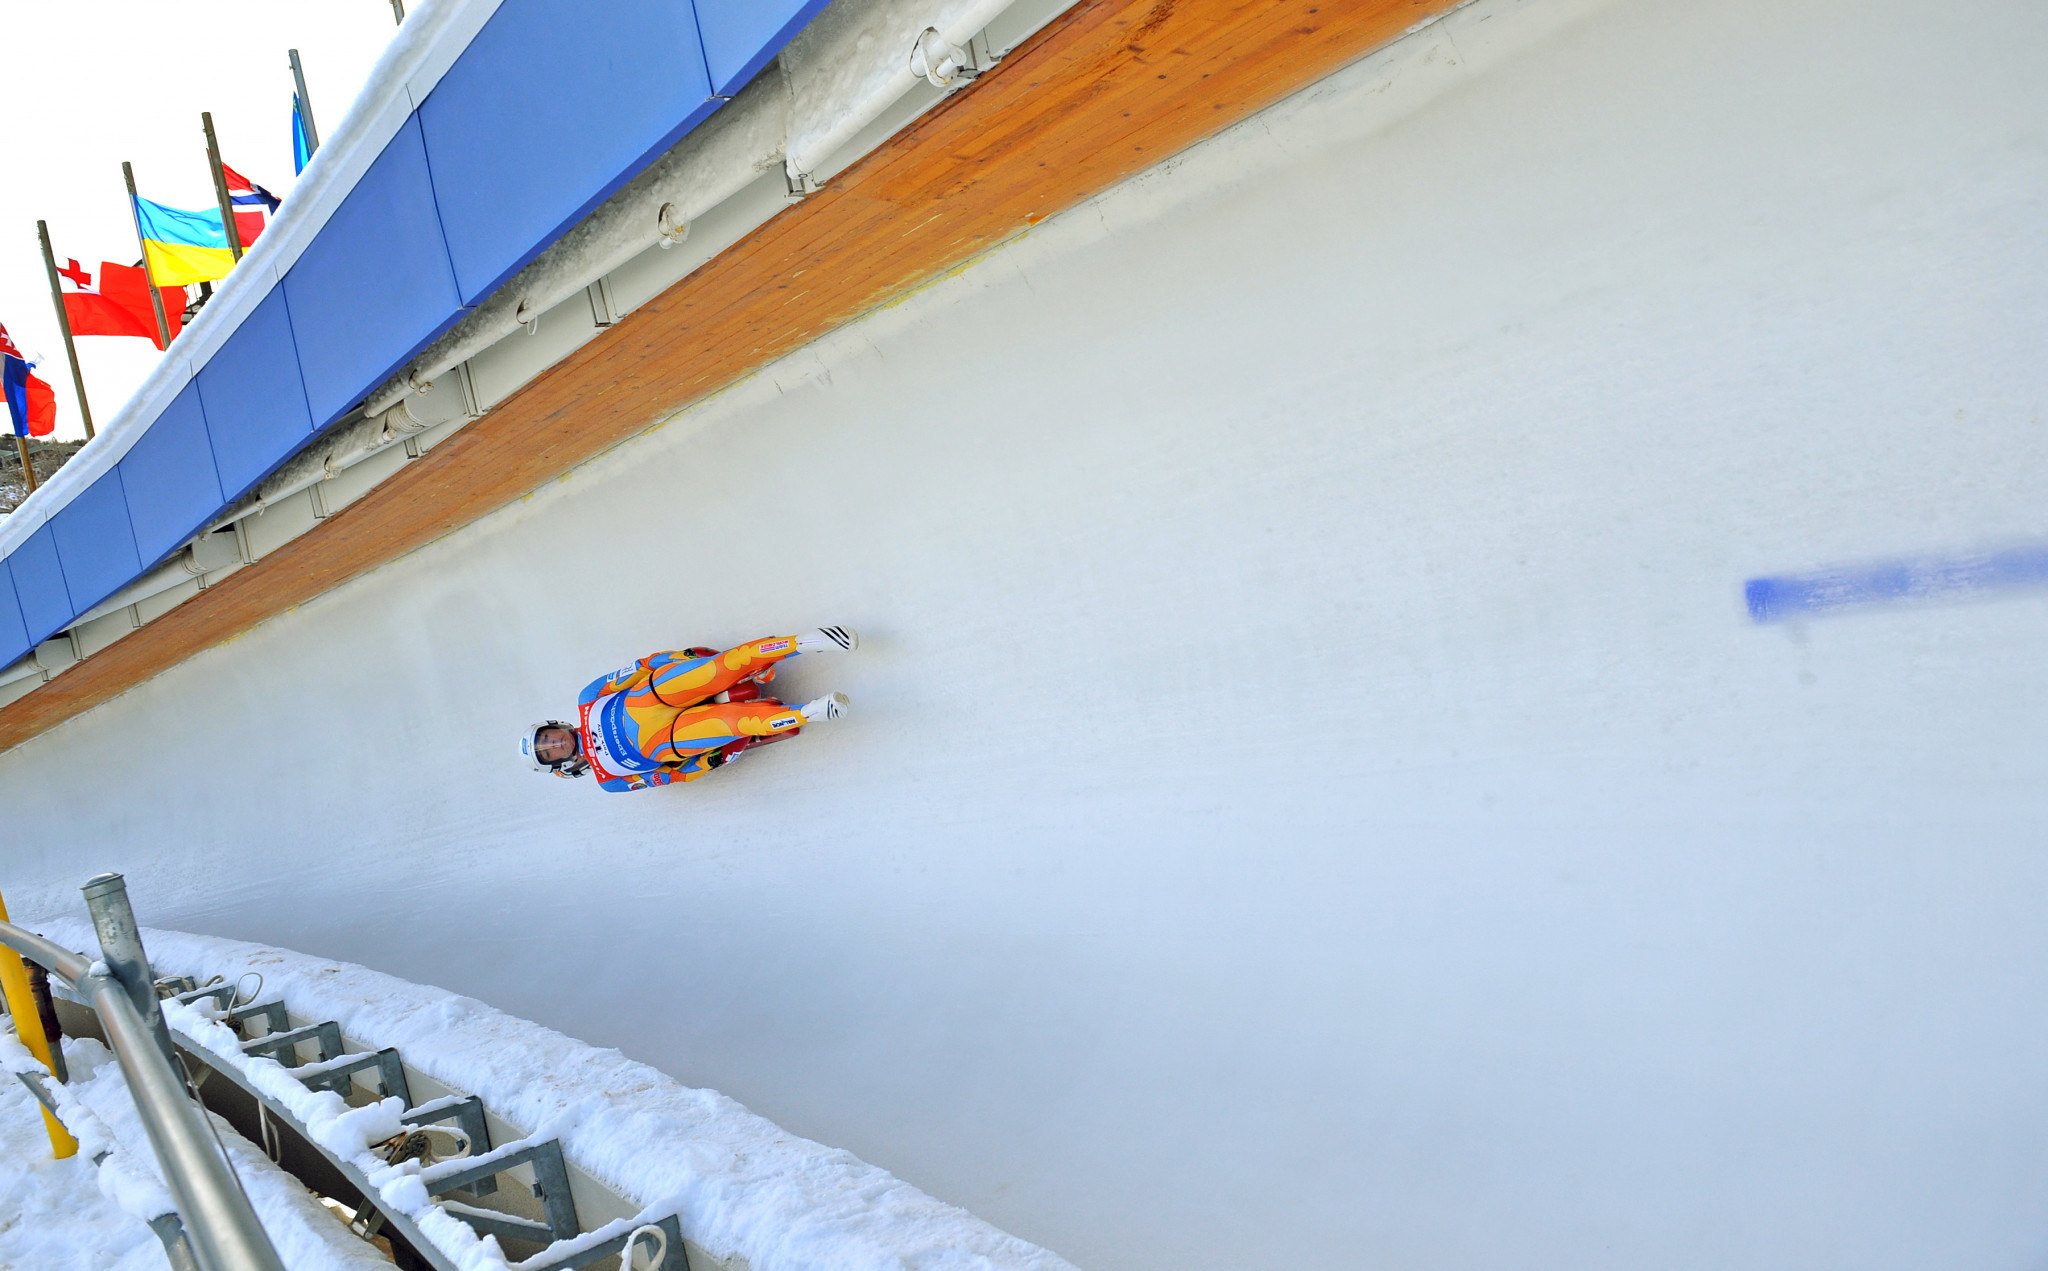 The International Luge Federation World Cup is set to take place in Sigulda in Latvia this weekend ©Getty Images